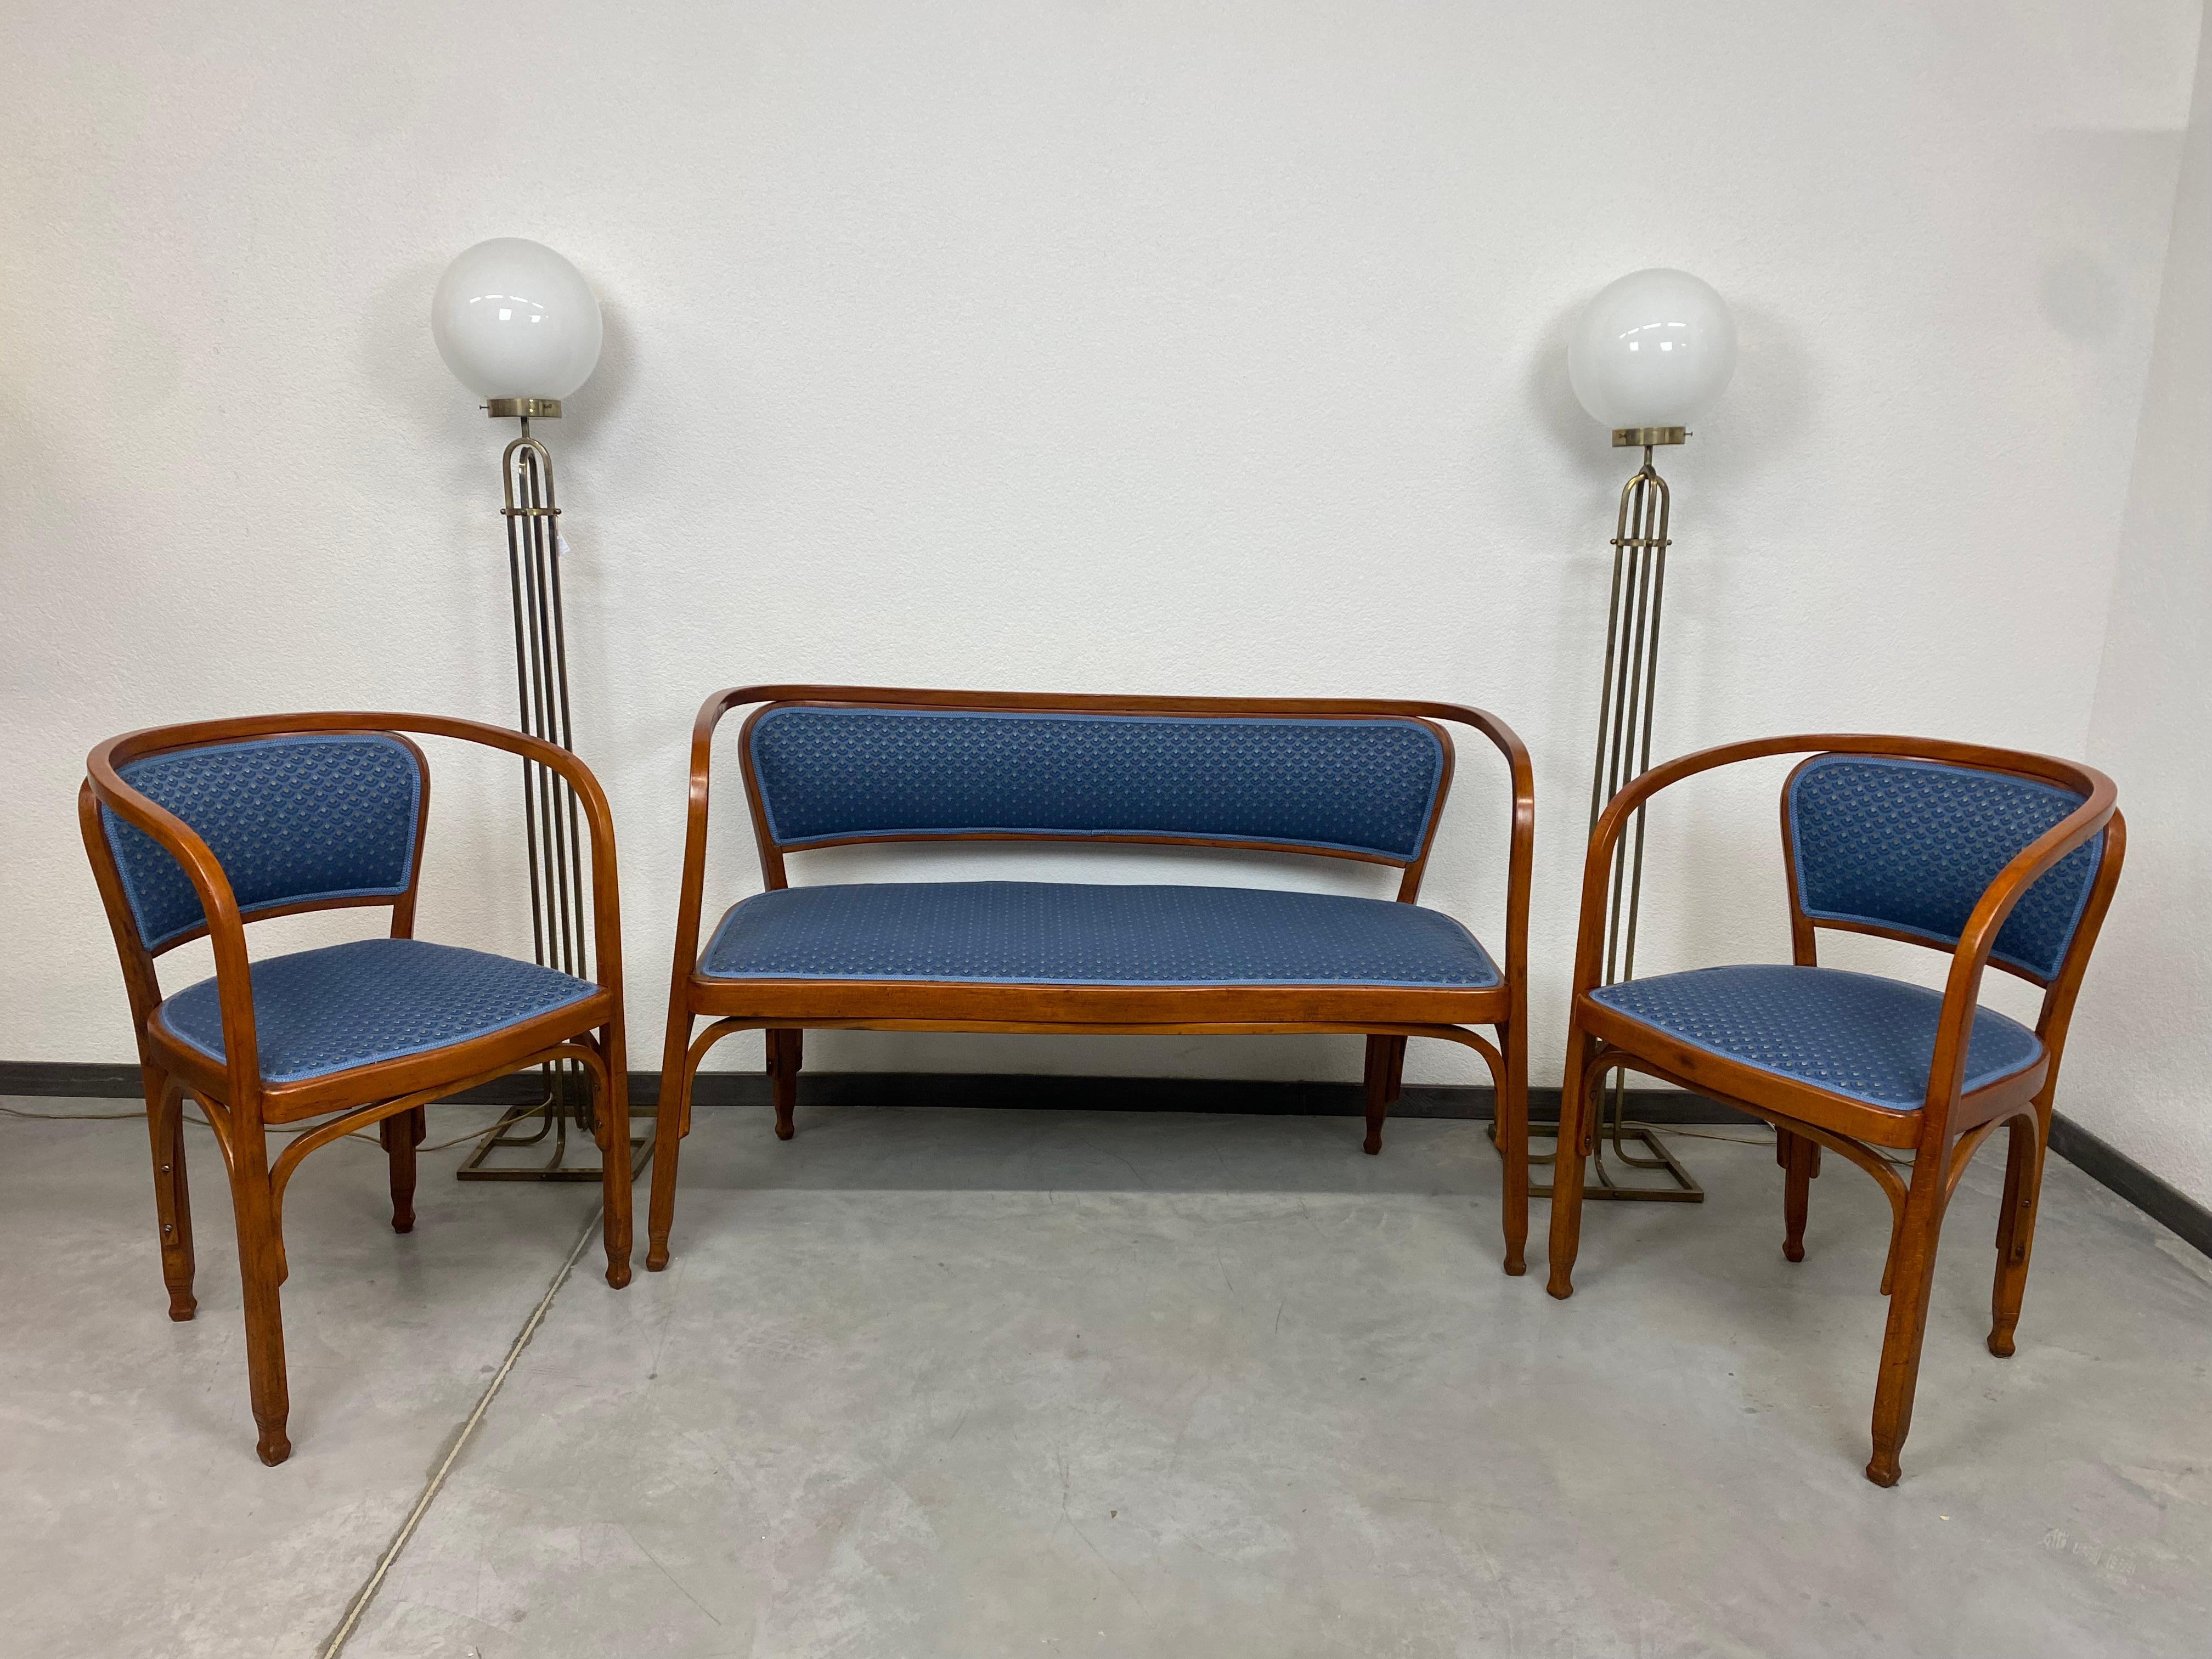 Vienna Secession Secession Seating Group No.715 by Gustav Siegel for J&J Kohn For Sale